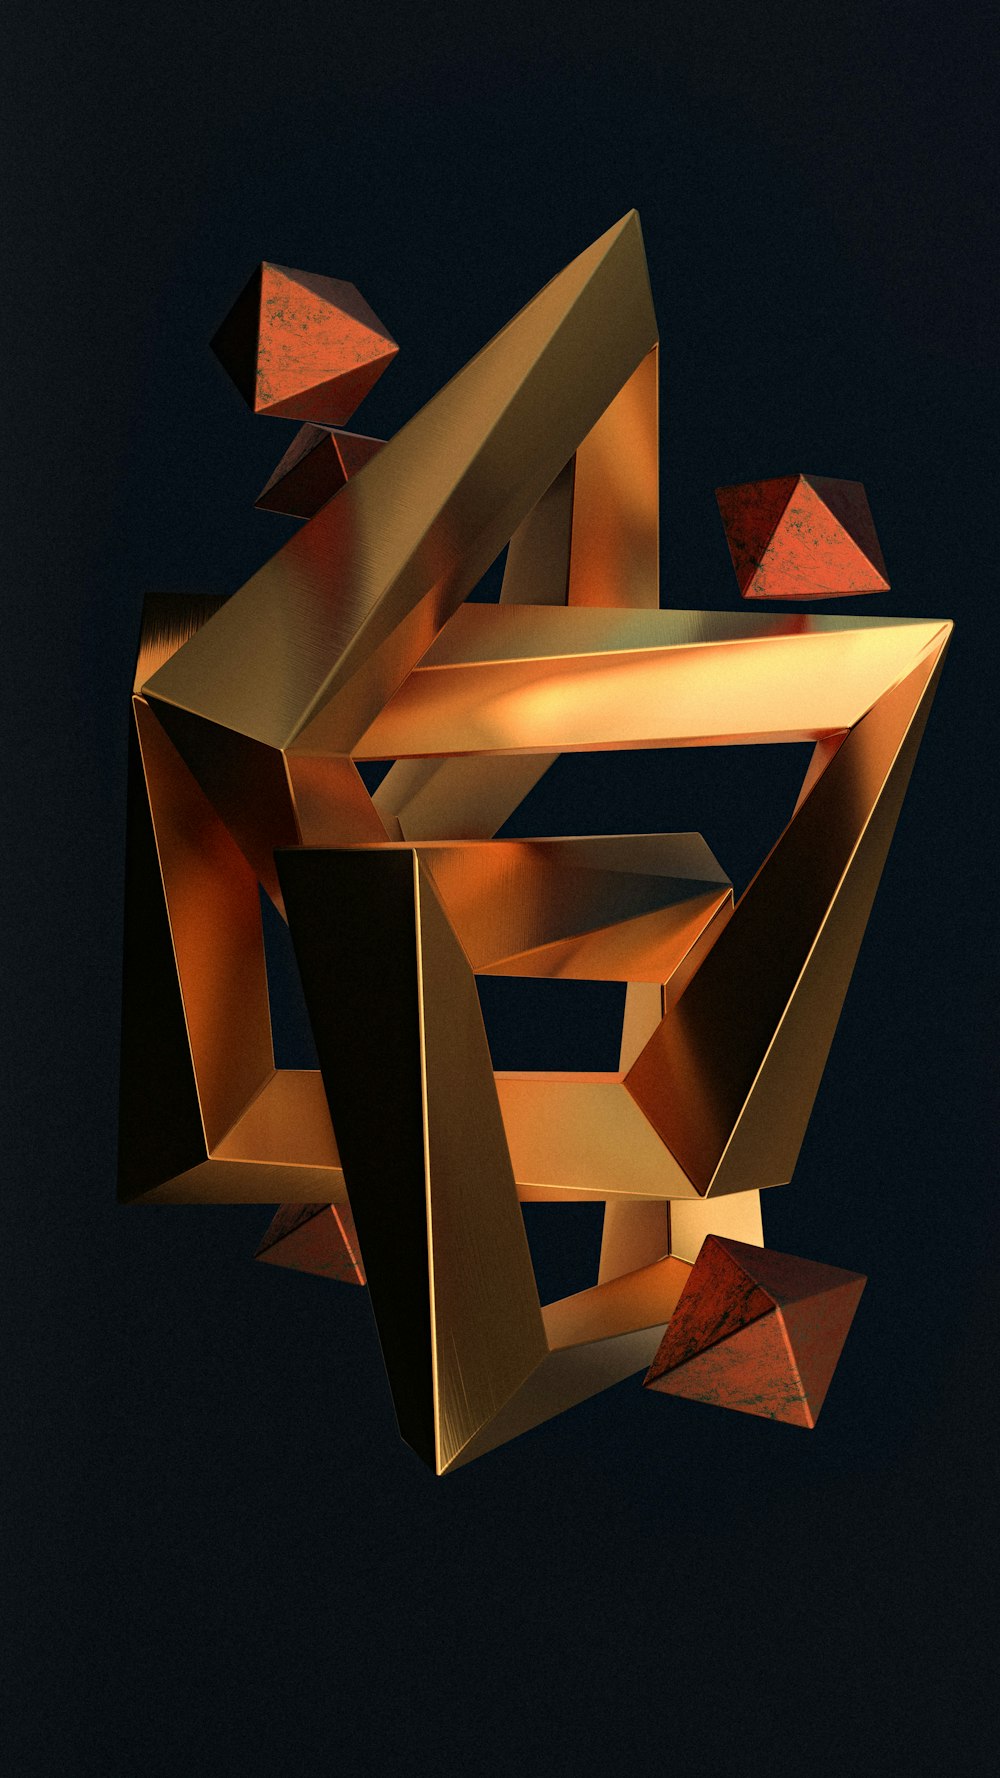 a gold sculpture is shown against a dark background